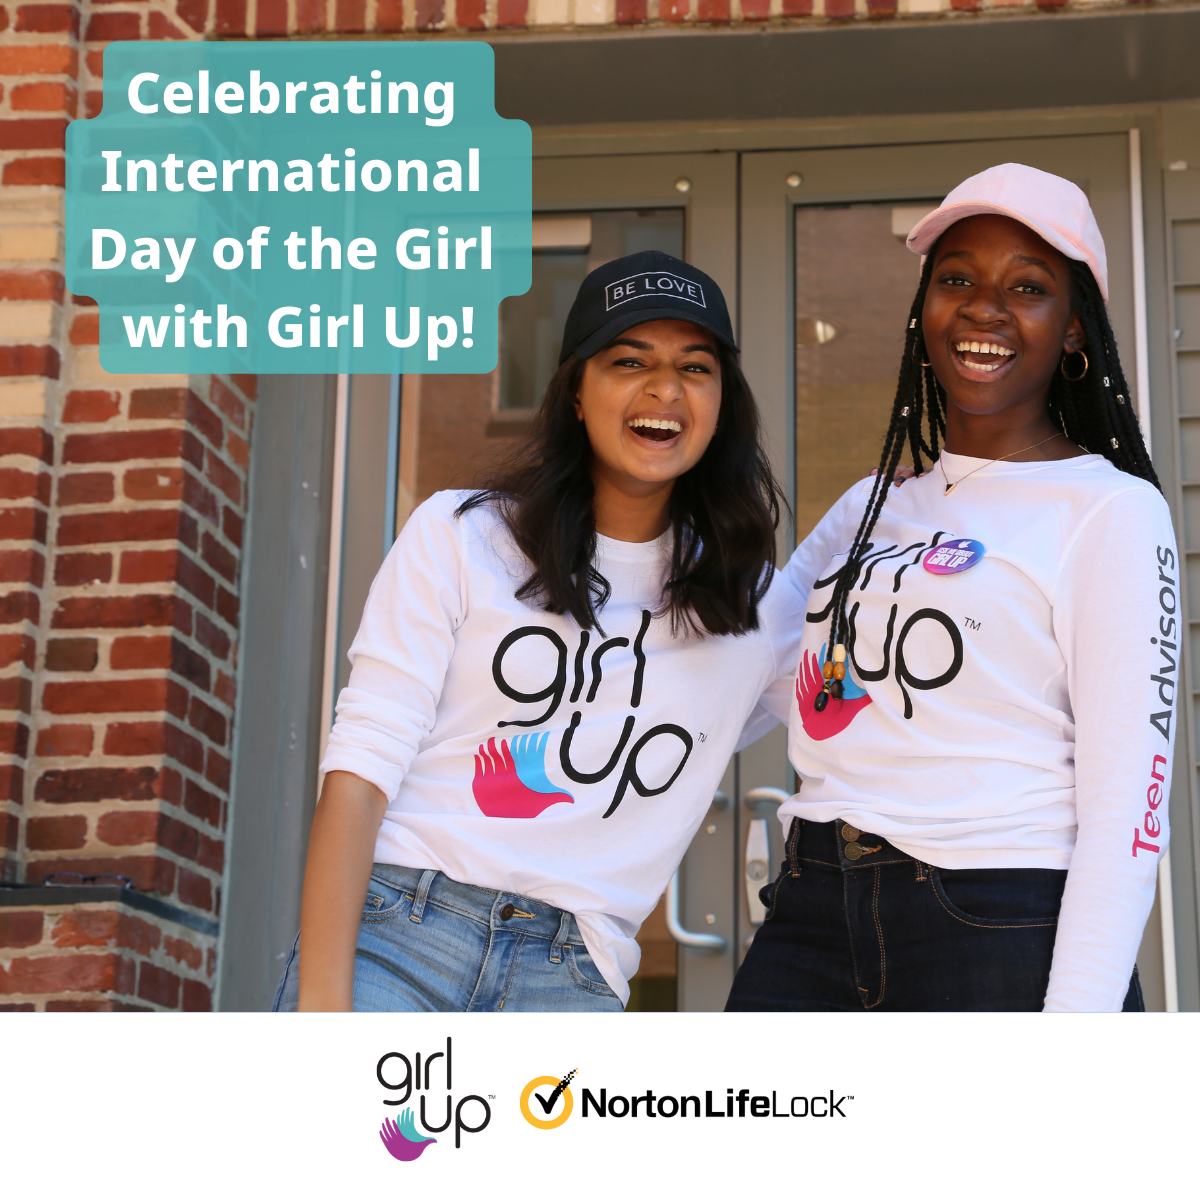 Two people on a front porch, both wearing "girl up" t-shirts.